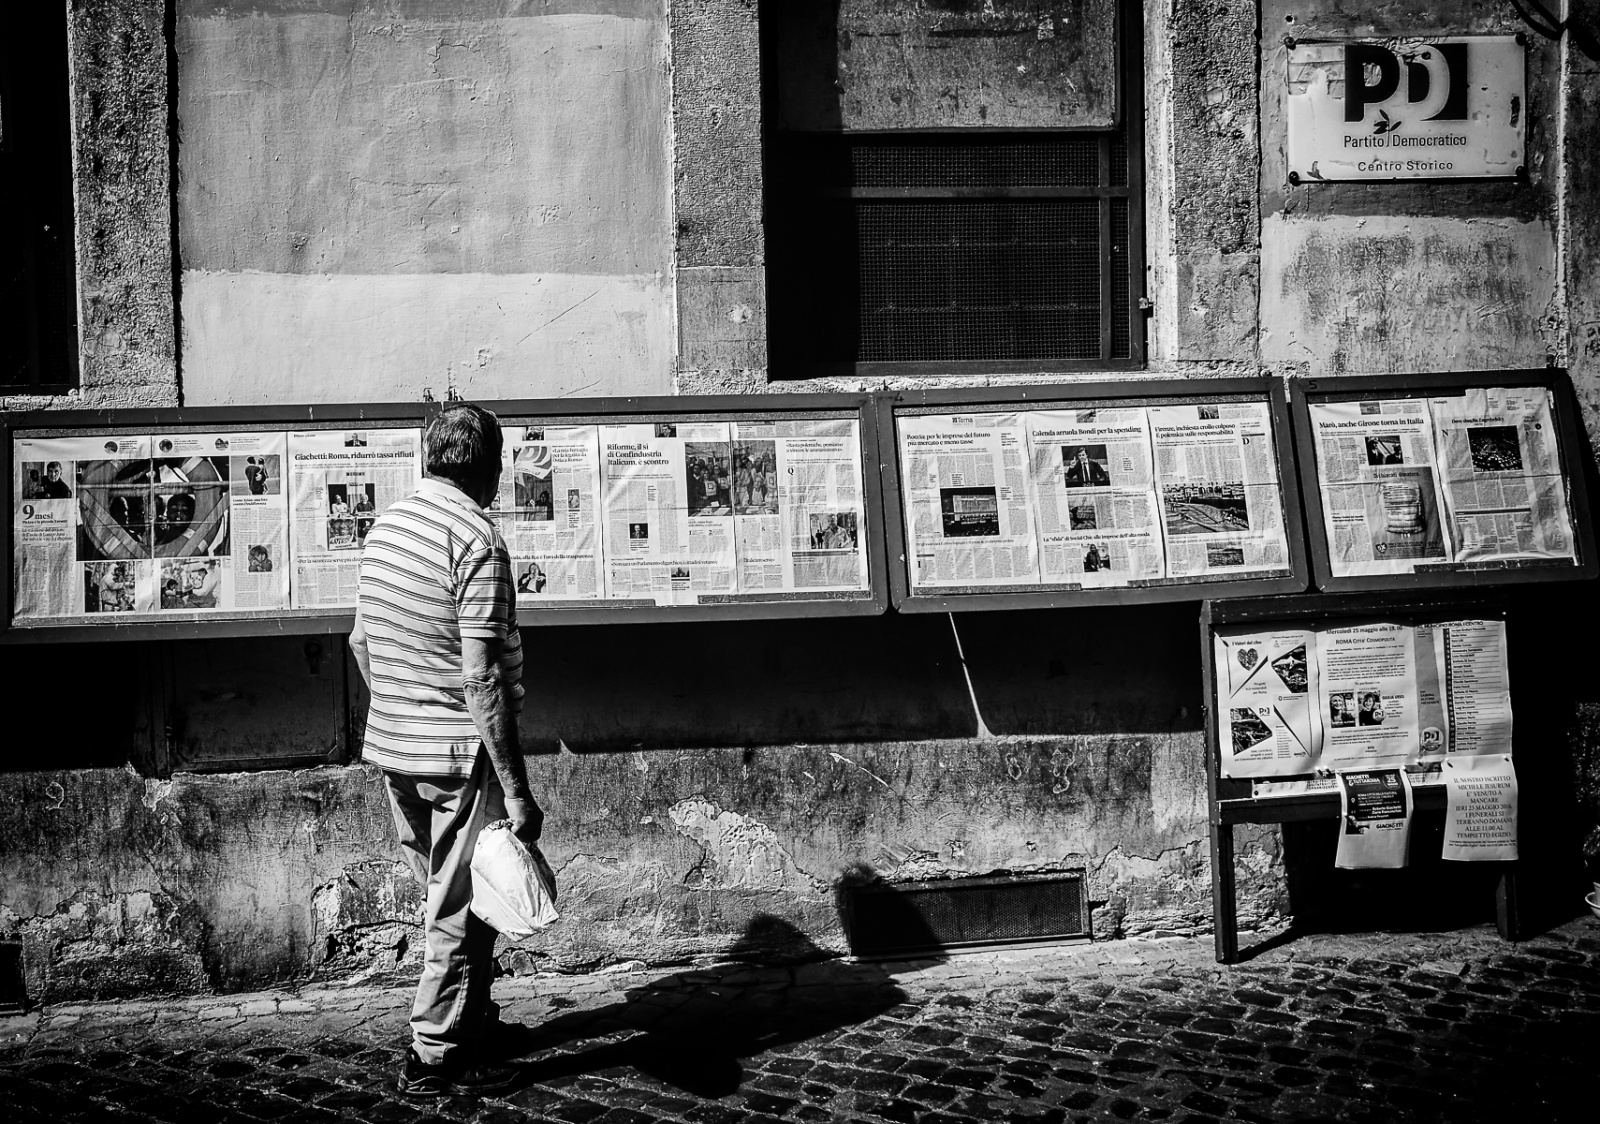 A man contemplating the newspaper outside the PD offices in Via dei Giubbonari